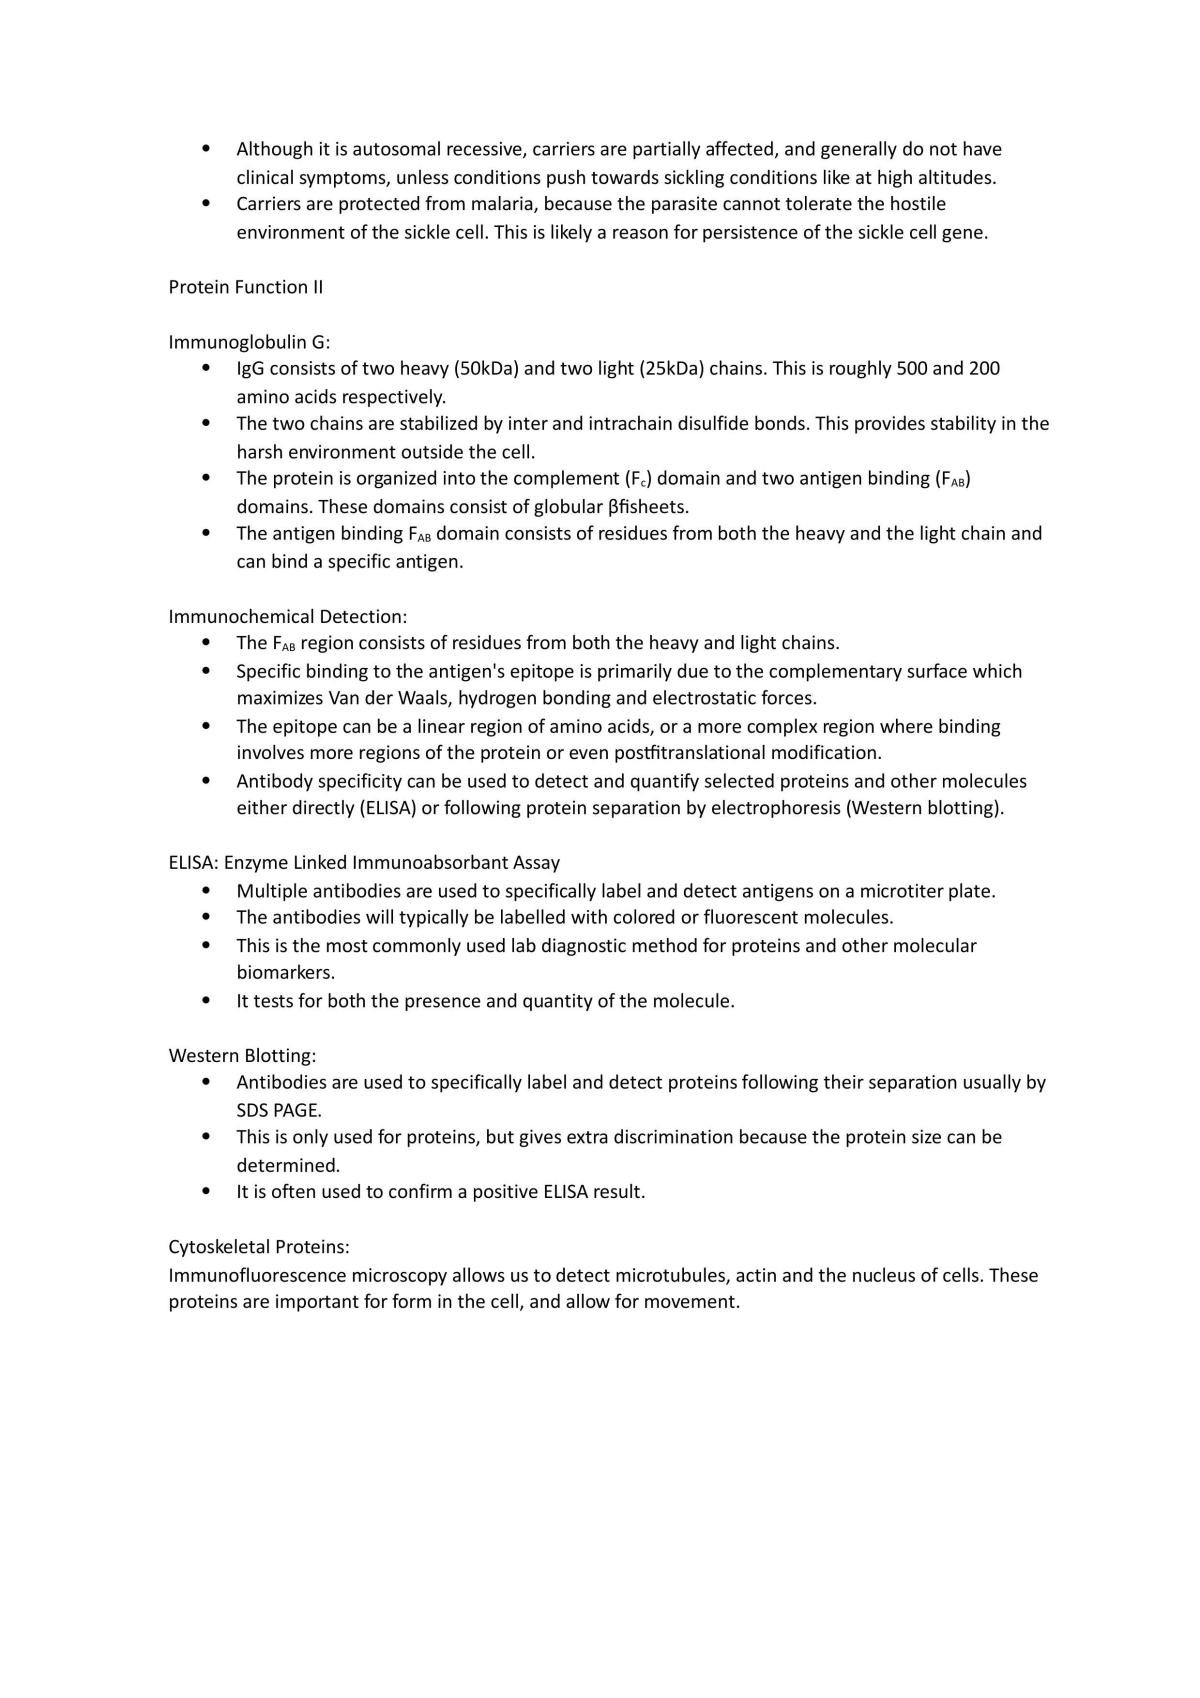 Introduction to Biochemistry Study Guide - Page 20